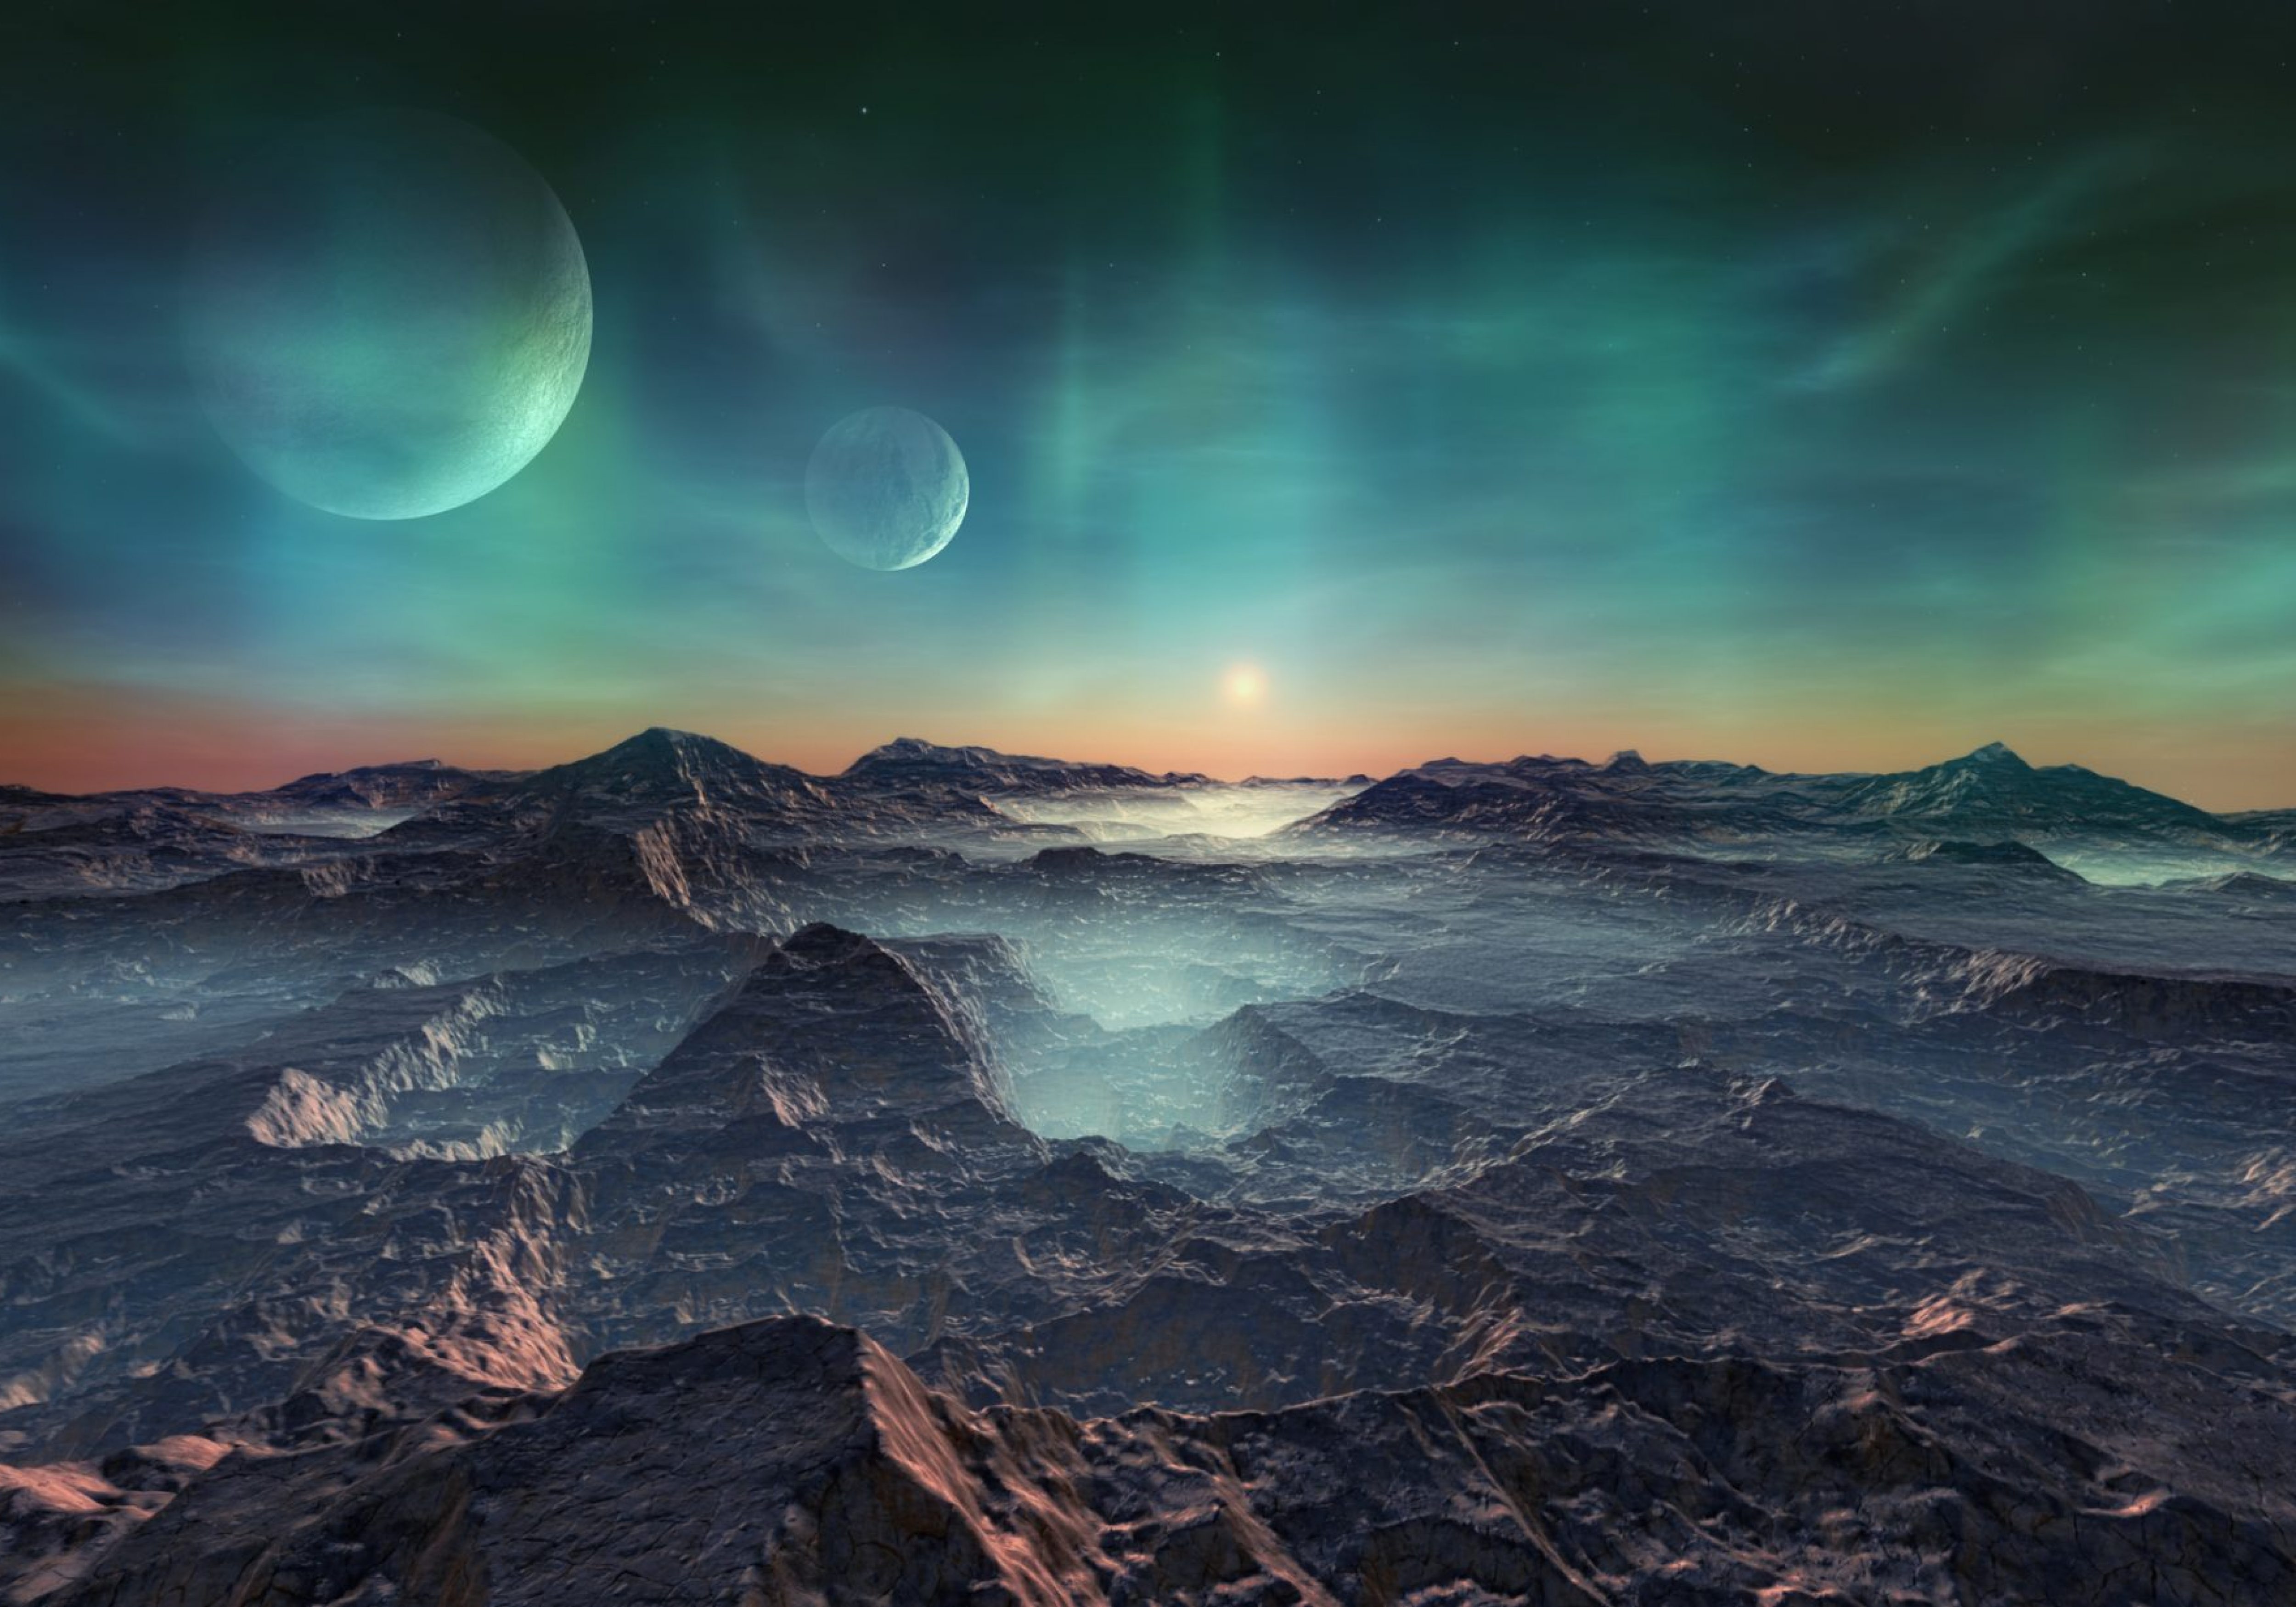 A dark Sci-fi landscape of mountains on an unknown world with two moons on a night horizon symbolises brave new worlds.